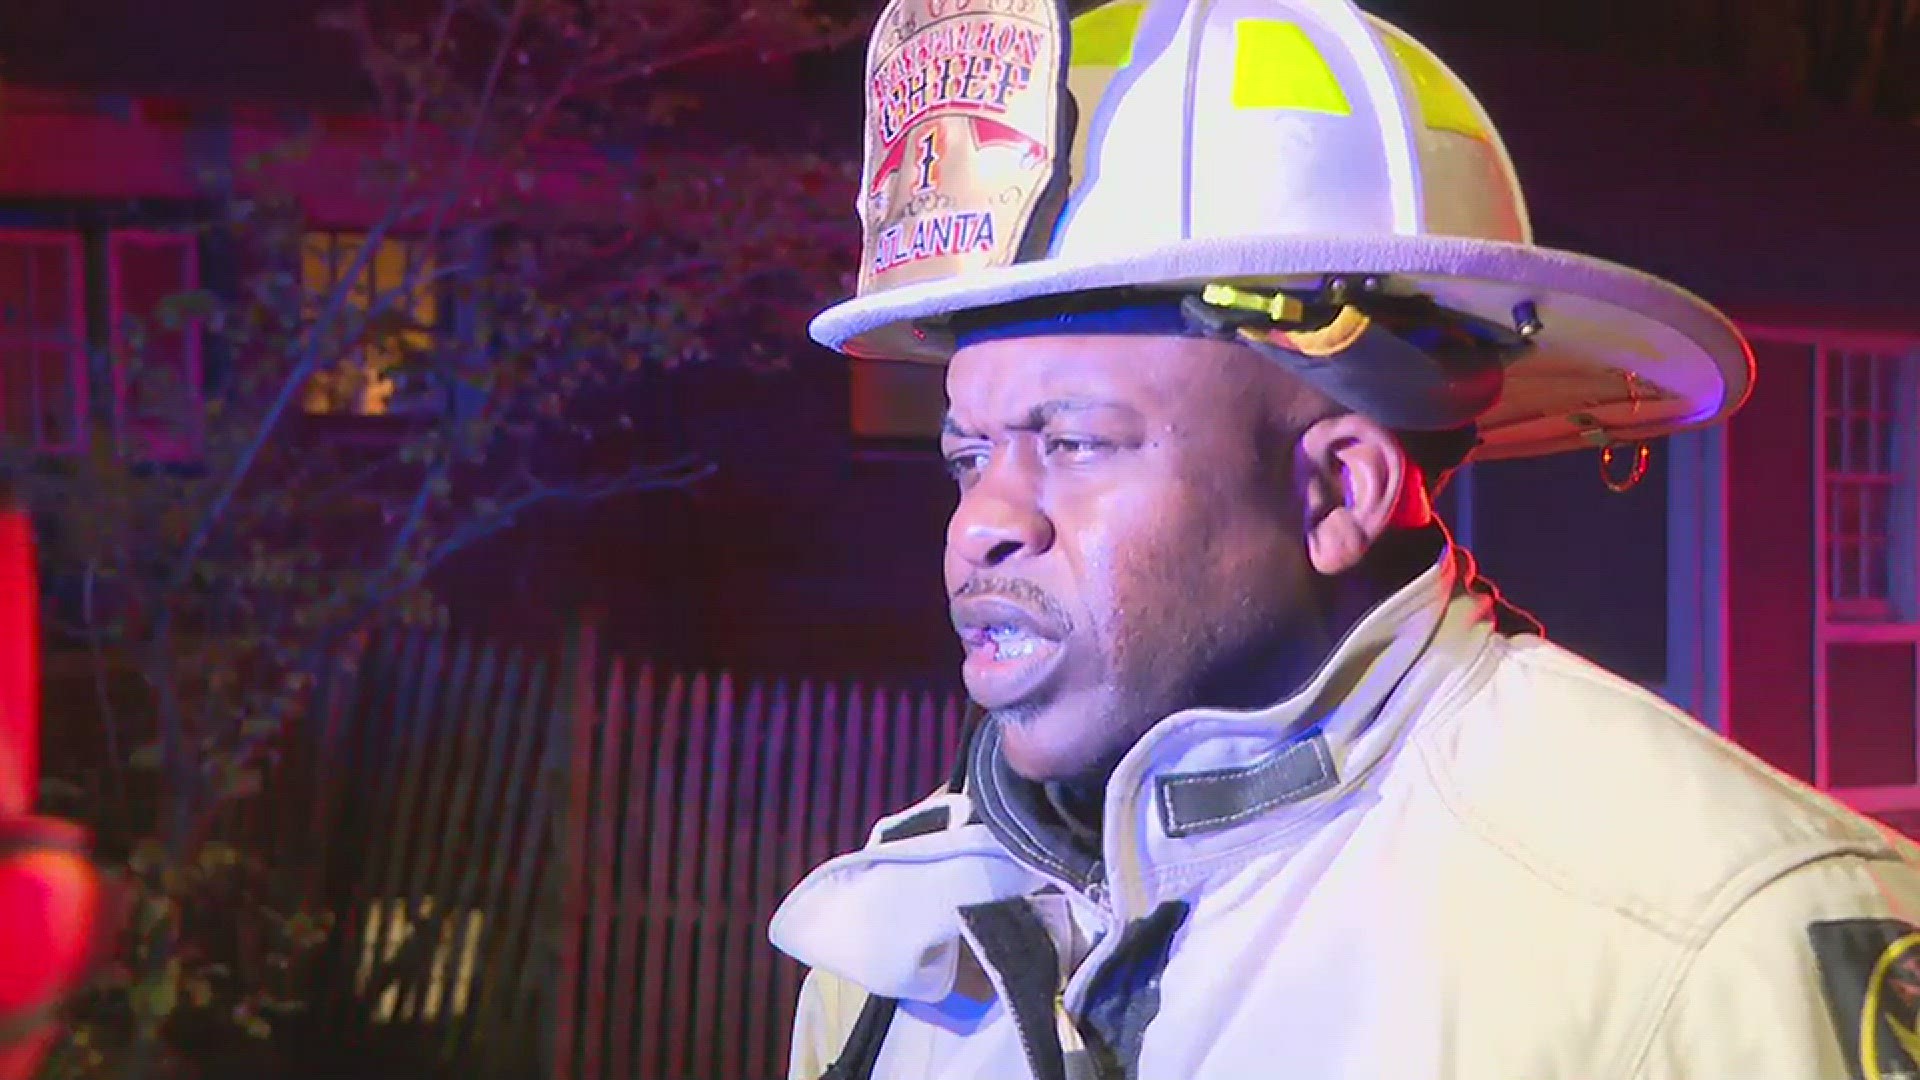 Atlanta Fire Chief Deaunte Grier said they got the call just before 6 a.m. Sunday.